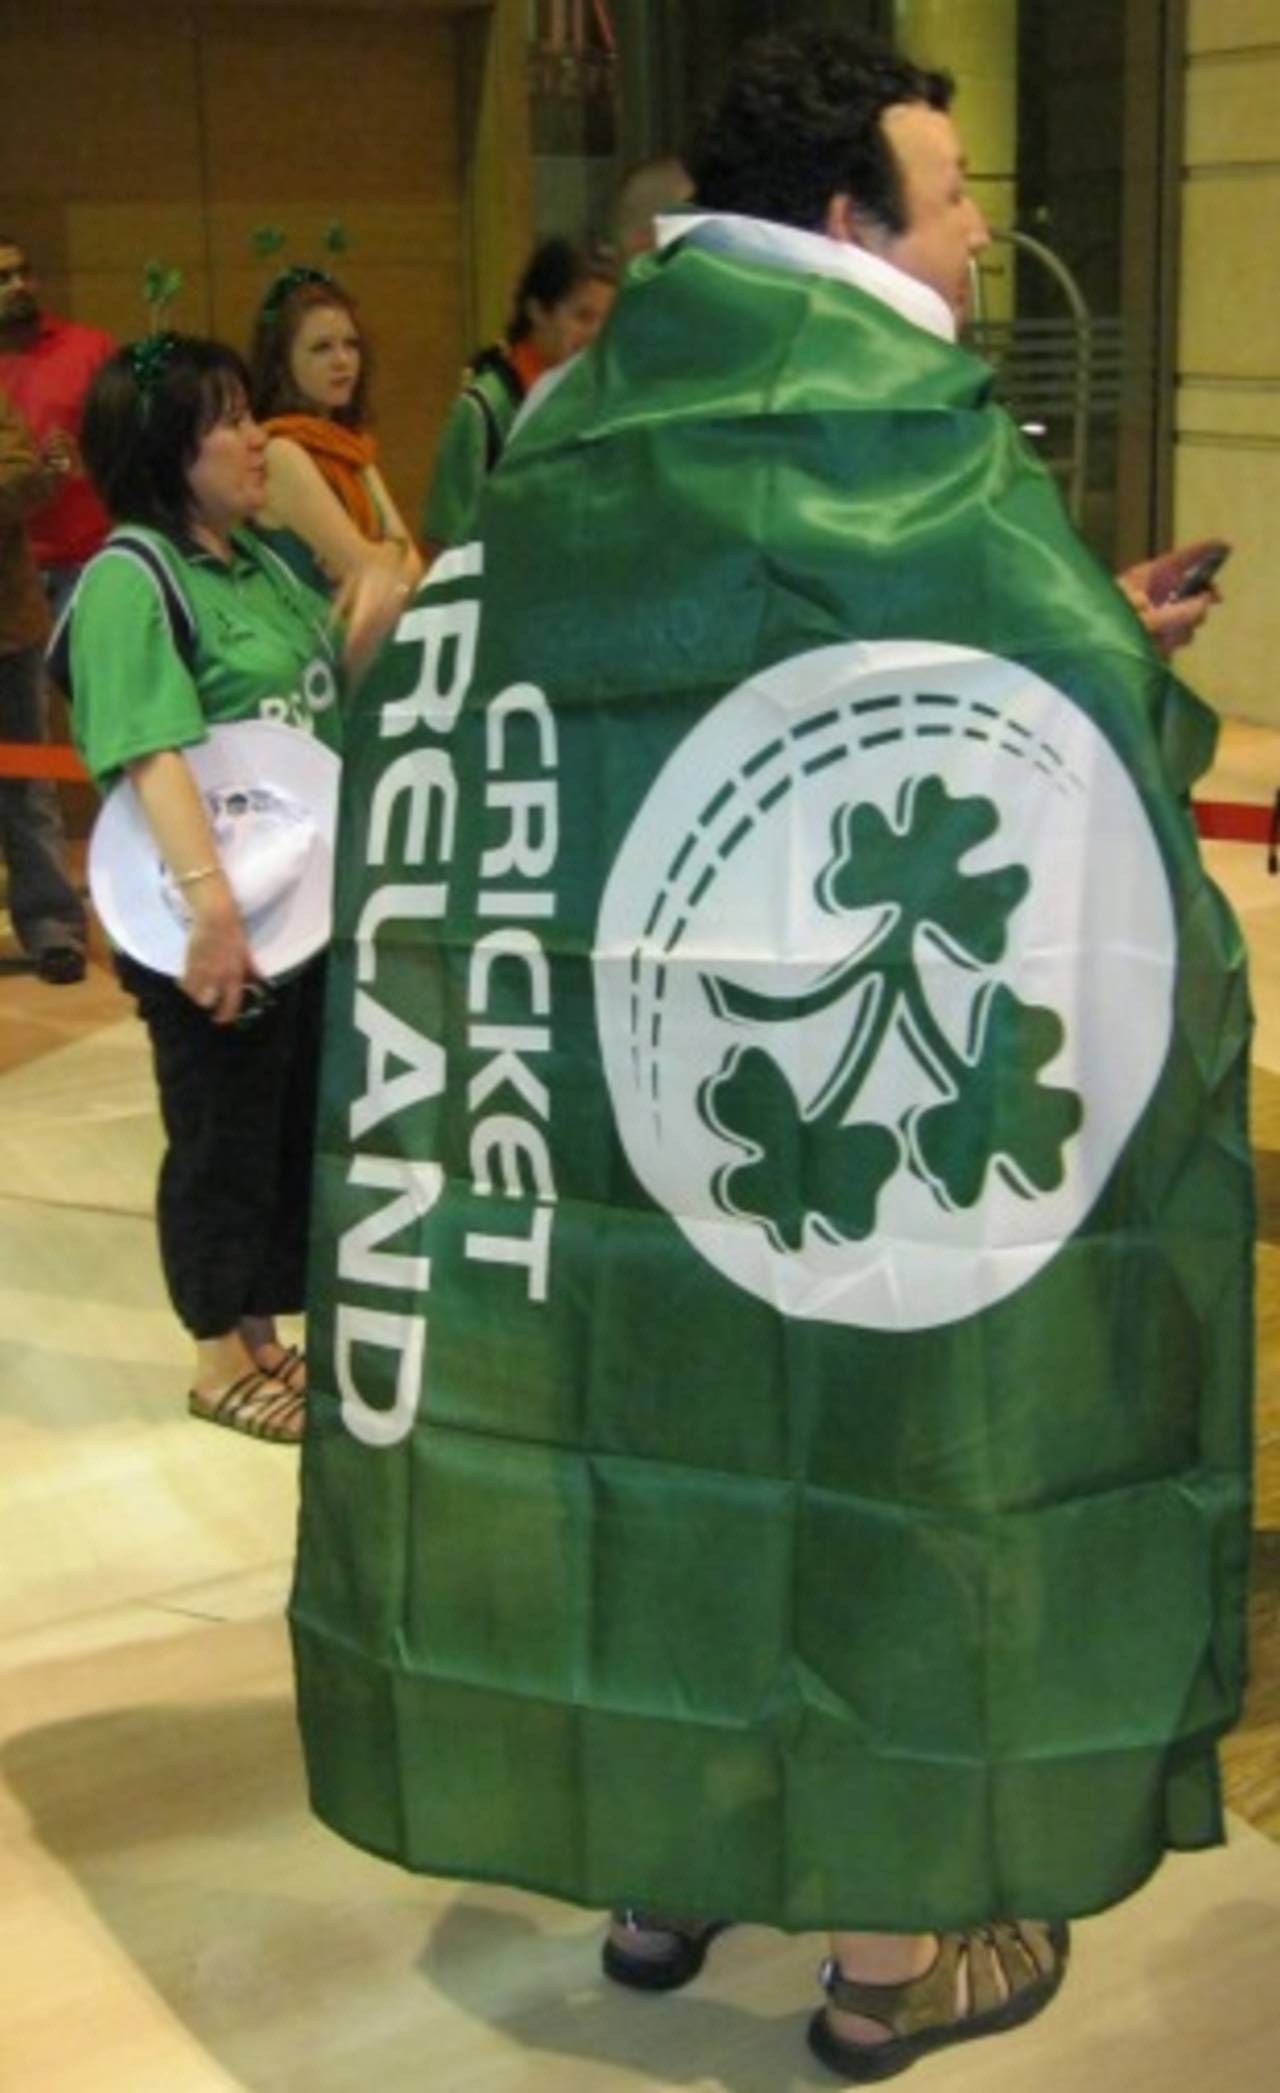 An Irish fan waits for the team to arrive at the team hotel, England v Ireland, World Cup 2011, Bangalore, March 2, 2011